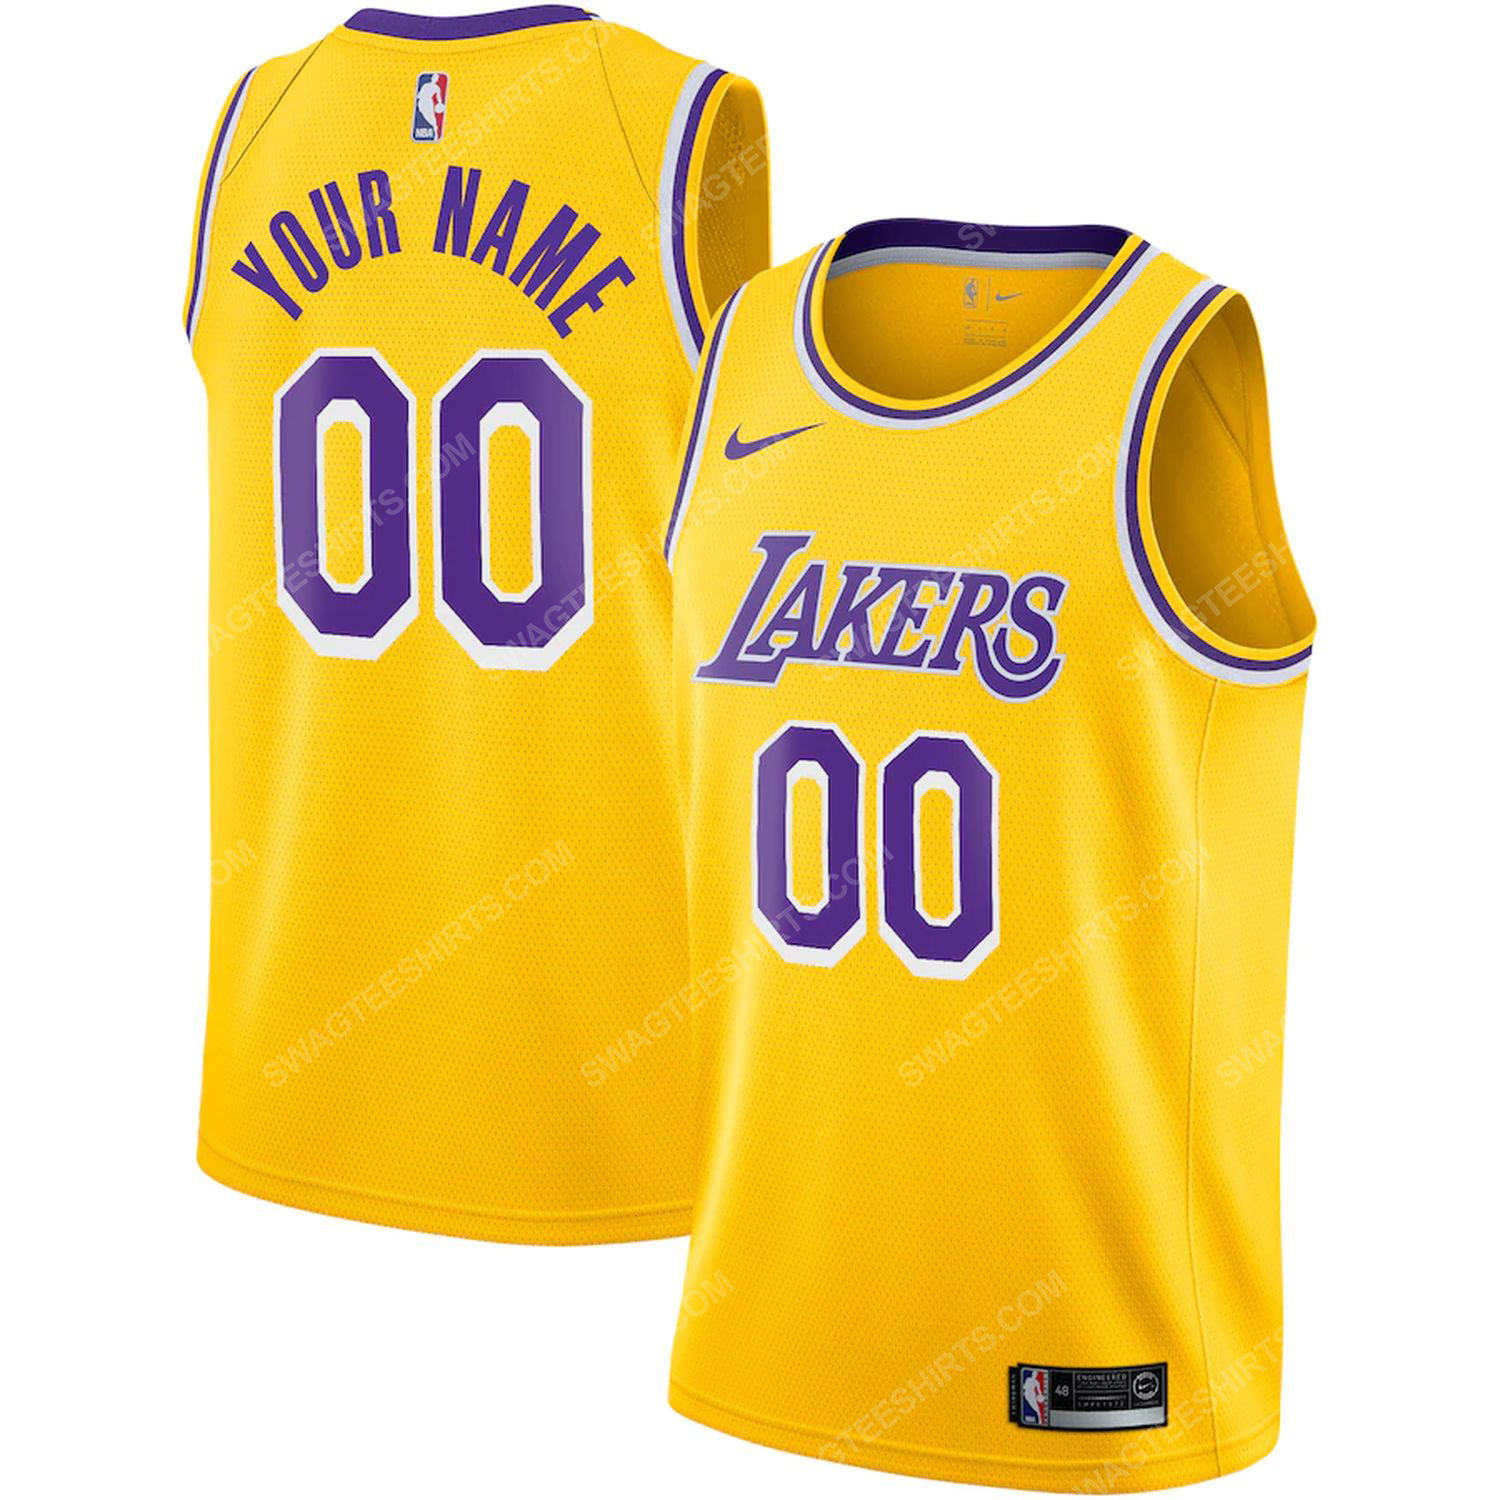 Custom nba los angeles lakers basketball jersey-icon edition- gold